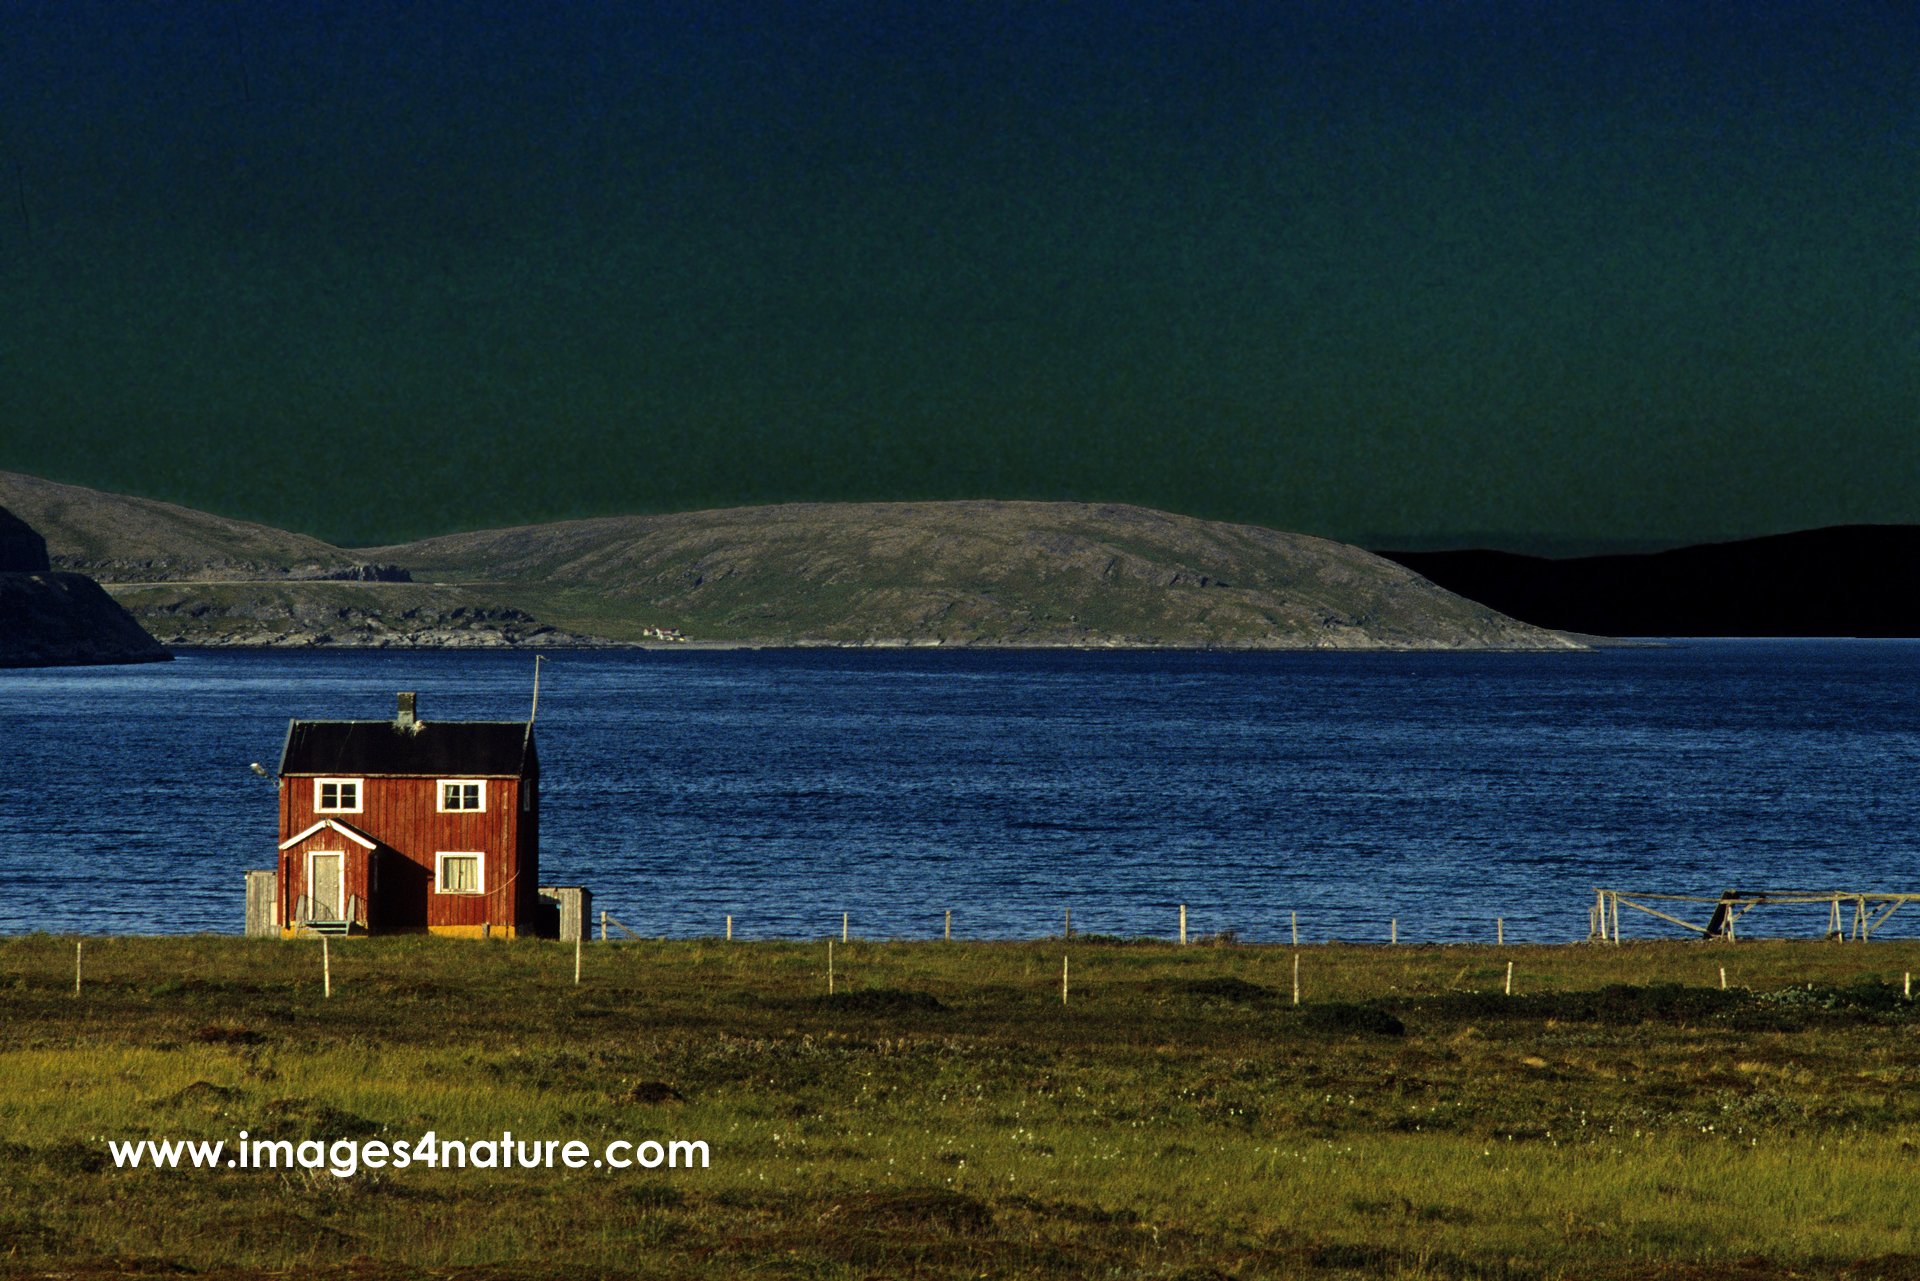 A lonely red painted wooden house on the shores of a fjord